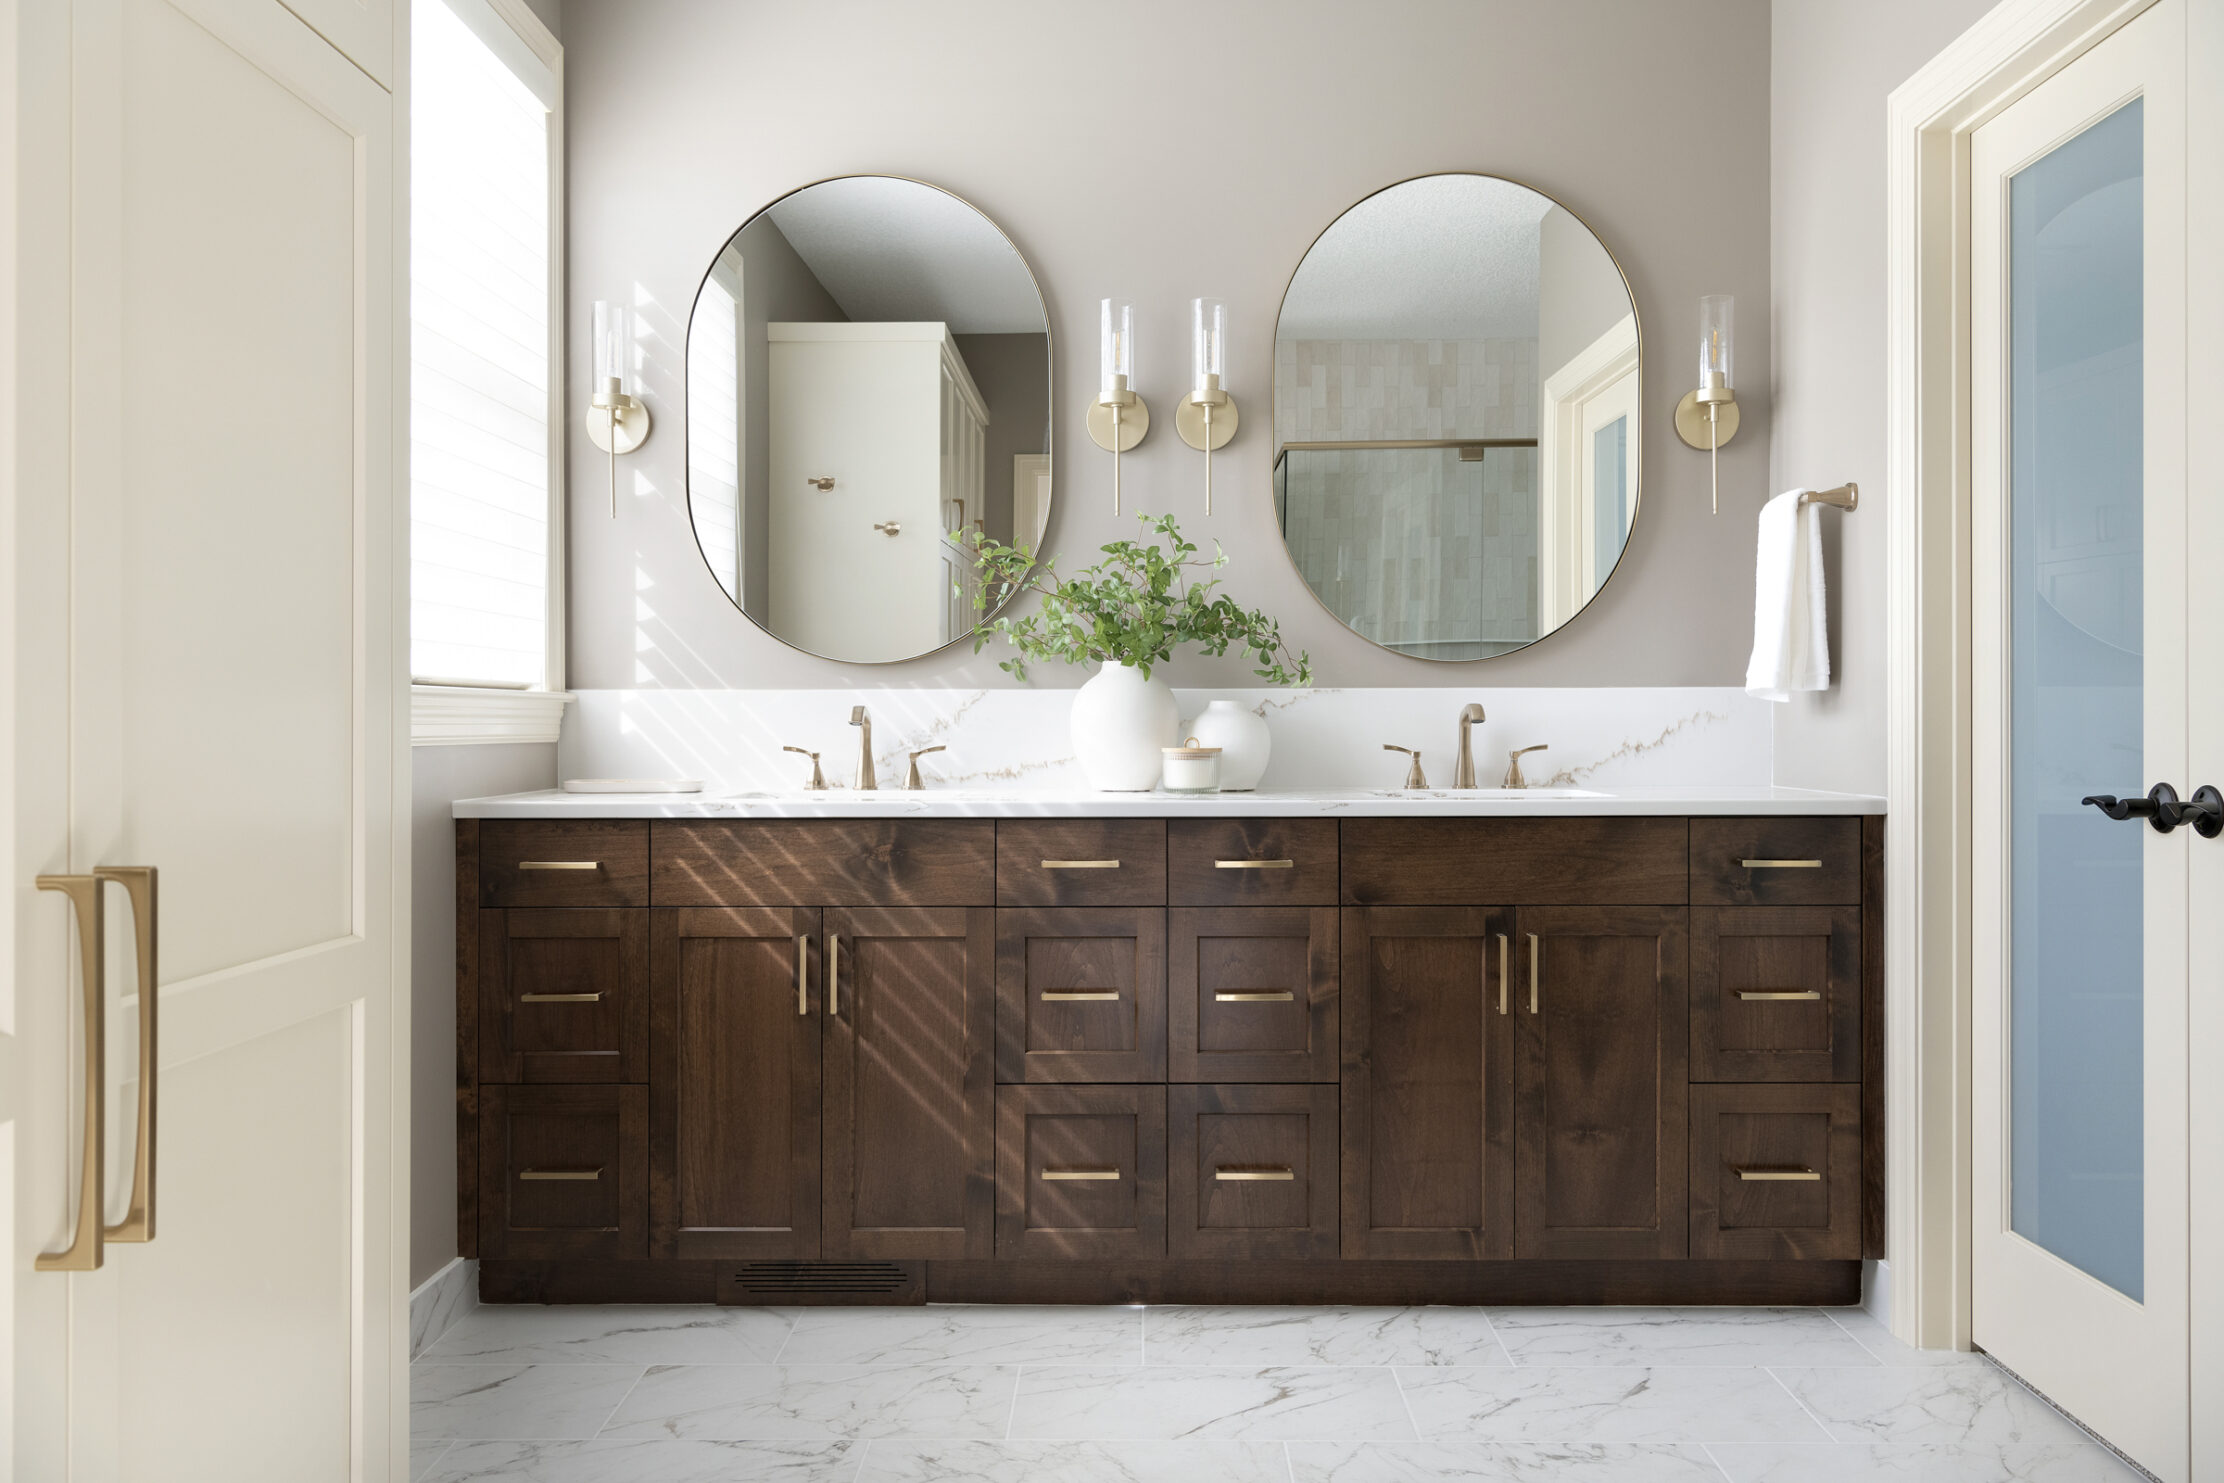 High end, luxury bathroom remodel from James Barton Design Build in Minneapolis